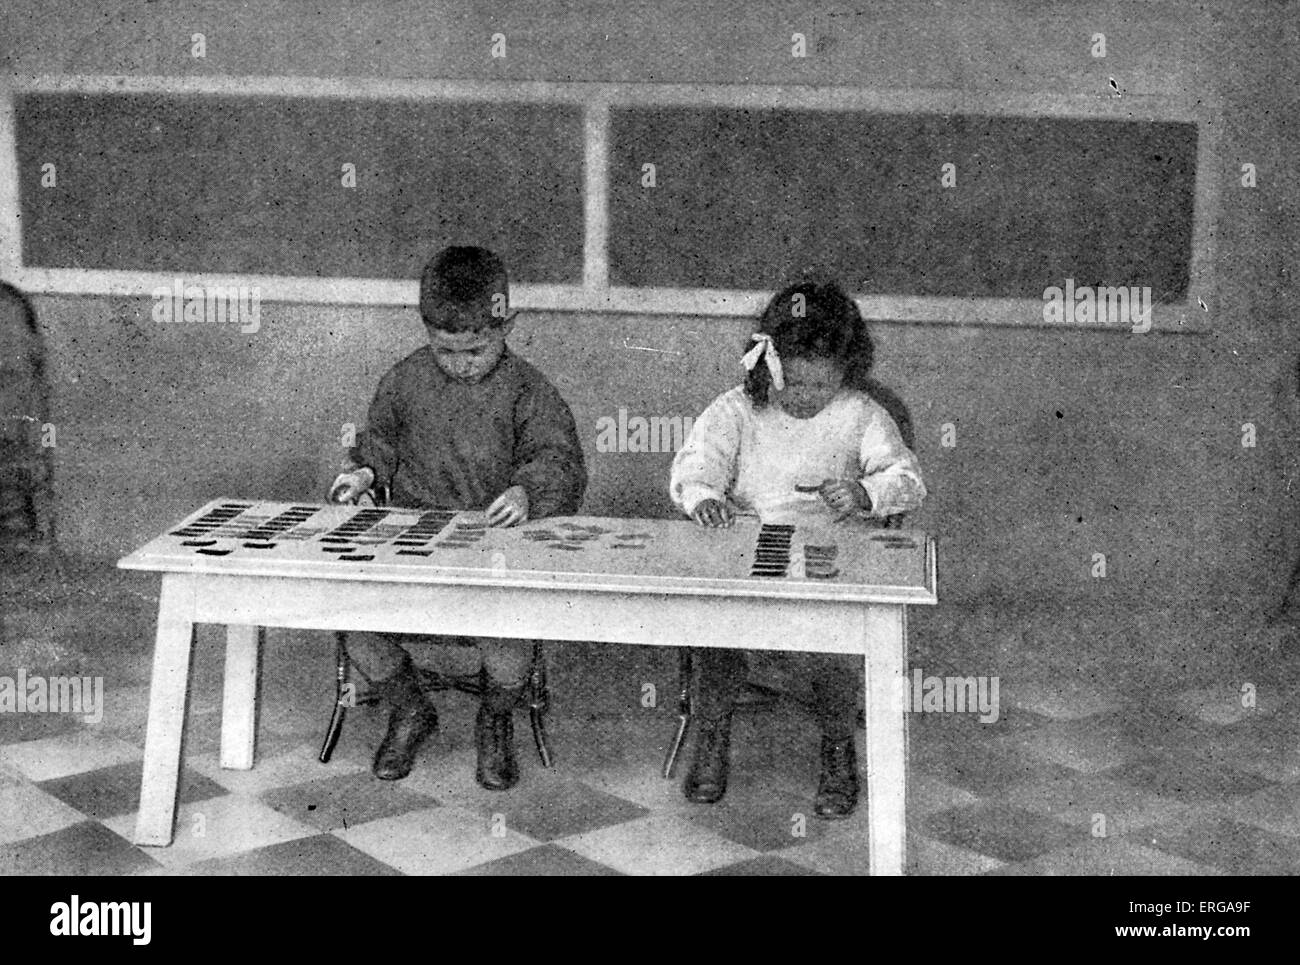 Montessori teaching method - early 20th century. Children working with language cards (placing articles and nouns together). Stock Photo